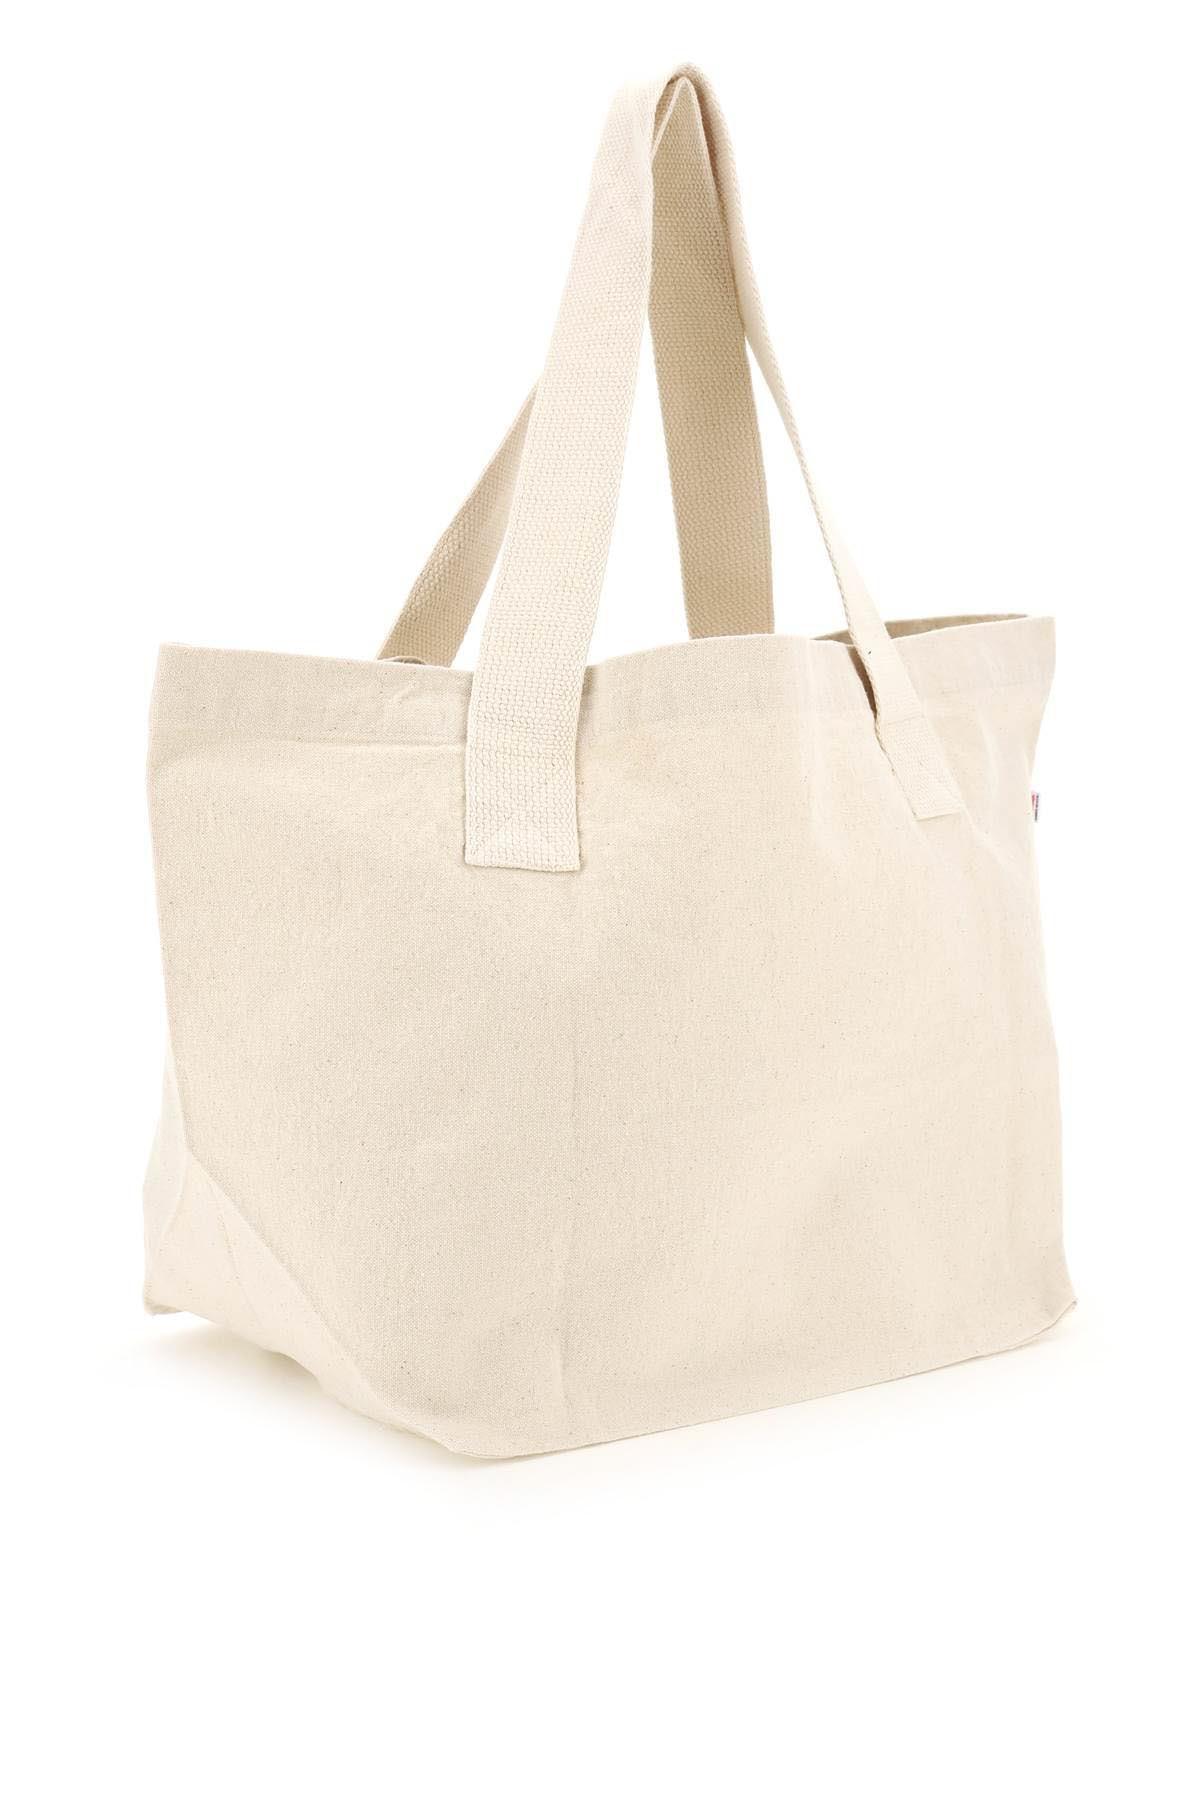 Sporty & Rich Sporty Rich fitness Group Canvas Tote Bag in Beige Womens Tote bags Sporty & Rich Tote bags - Save 37% Natural 